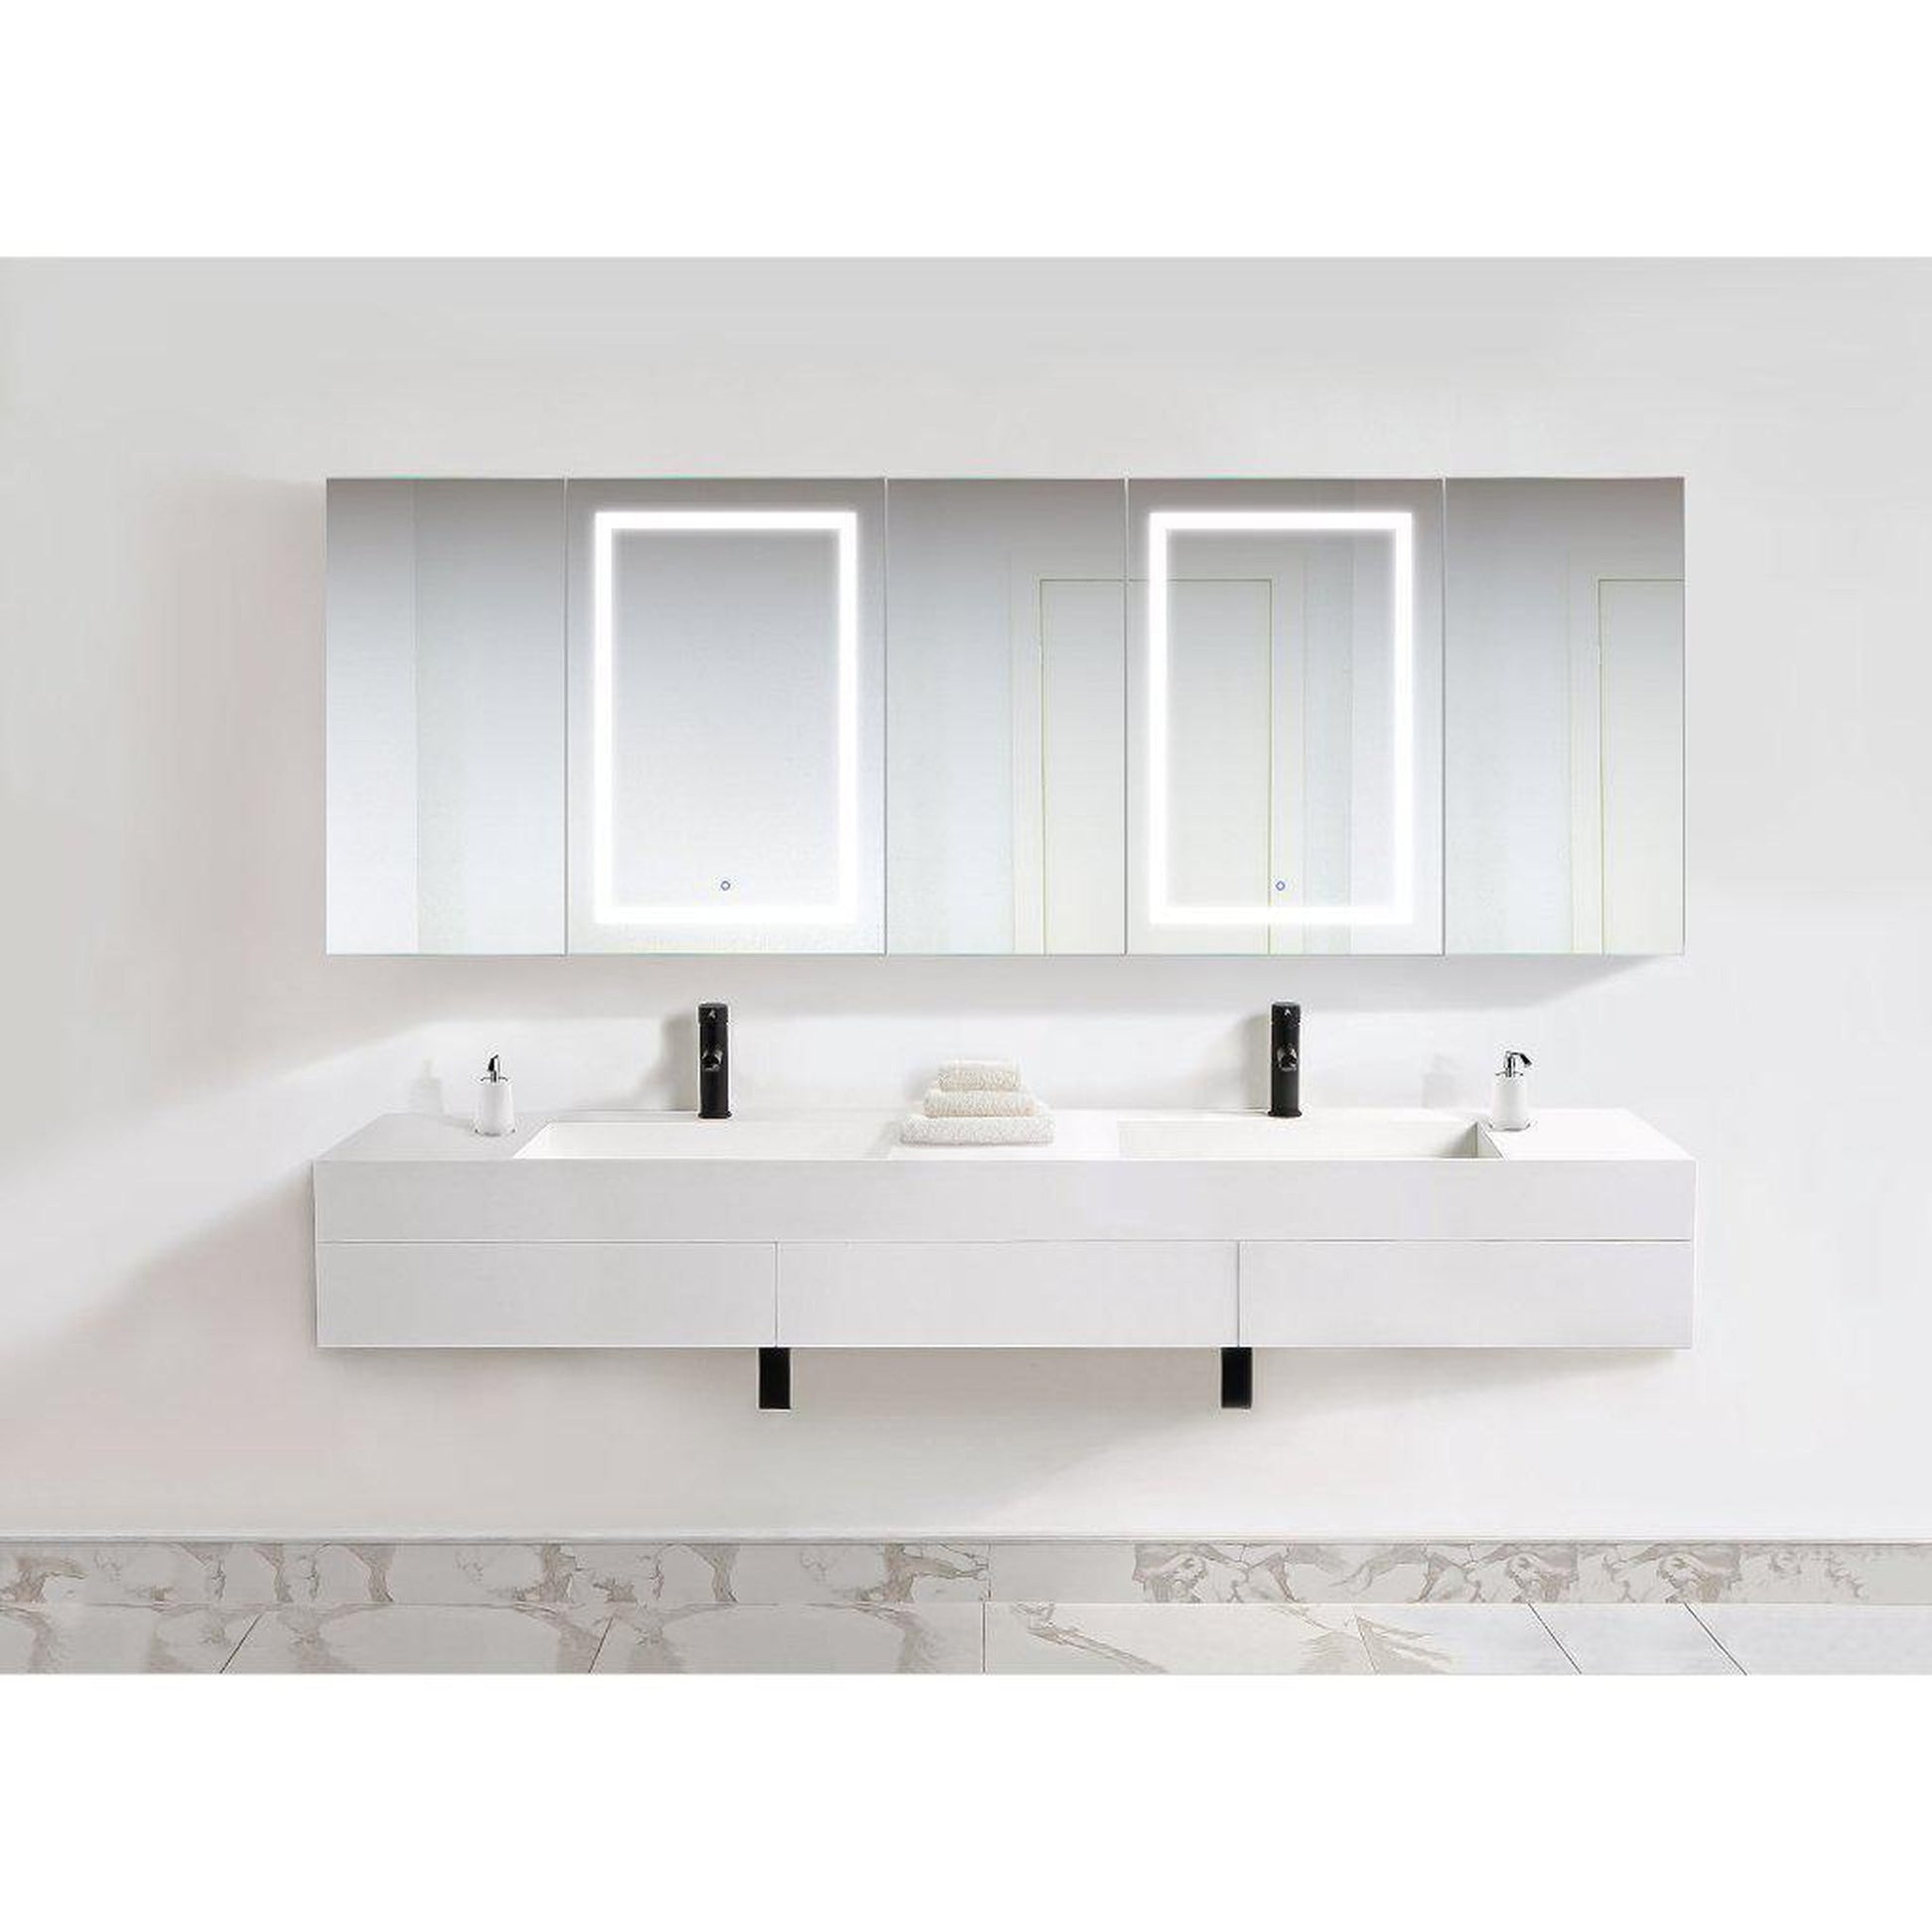 Krugg Reflections Svange 102" x 36" 5000K Double Penta-View Left-Left-Right-Right-Right Opening Recessed/Surface-Mount Illuminated Silver Backed LED Medicine Cabinet Mirror With Built-in Defogger, Dimmer and Electrical Outlet